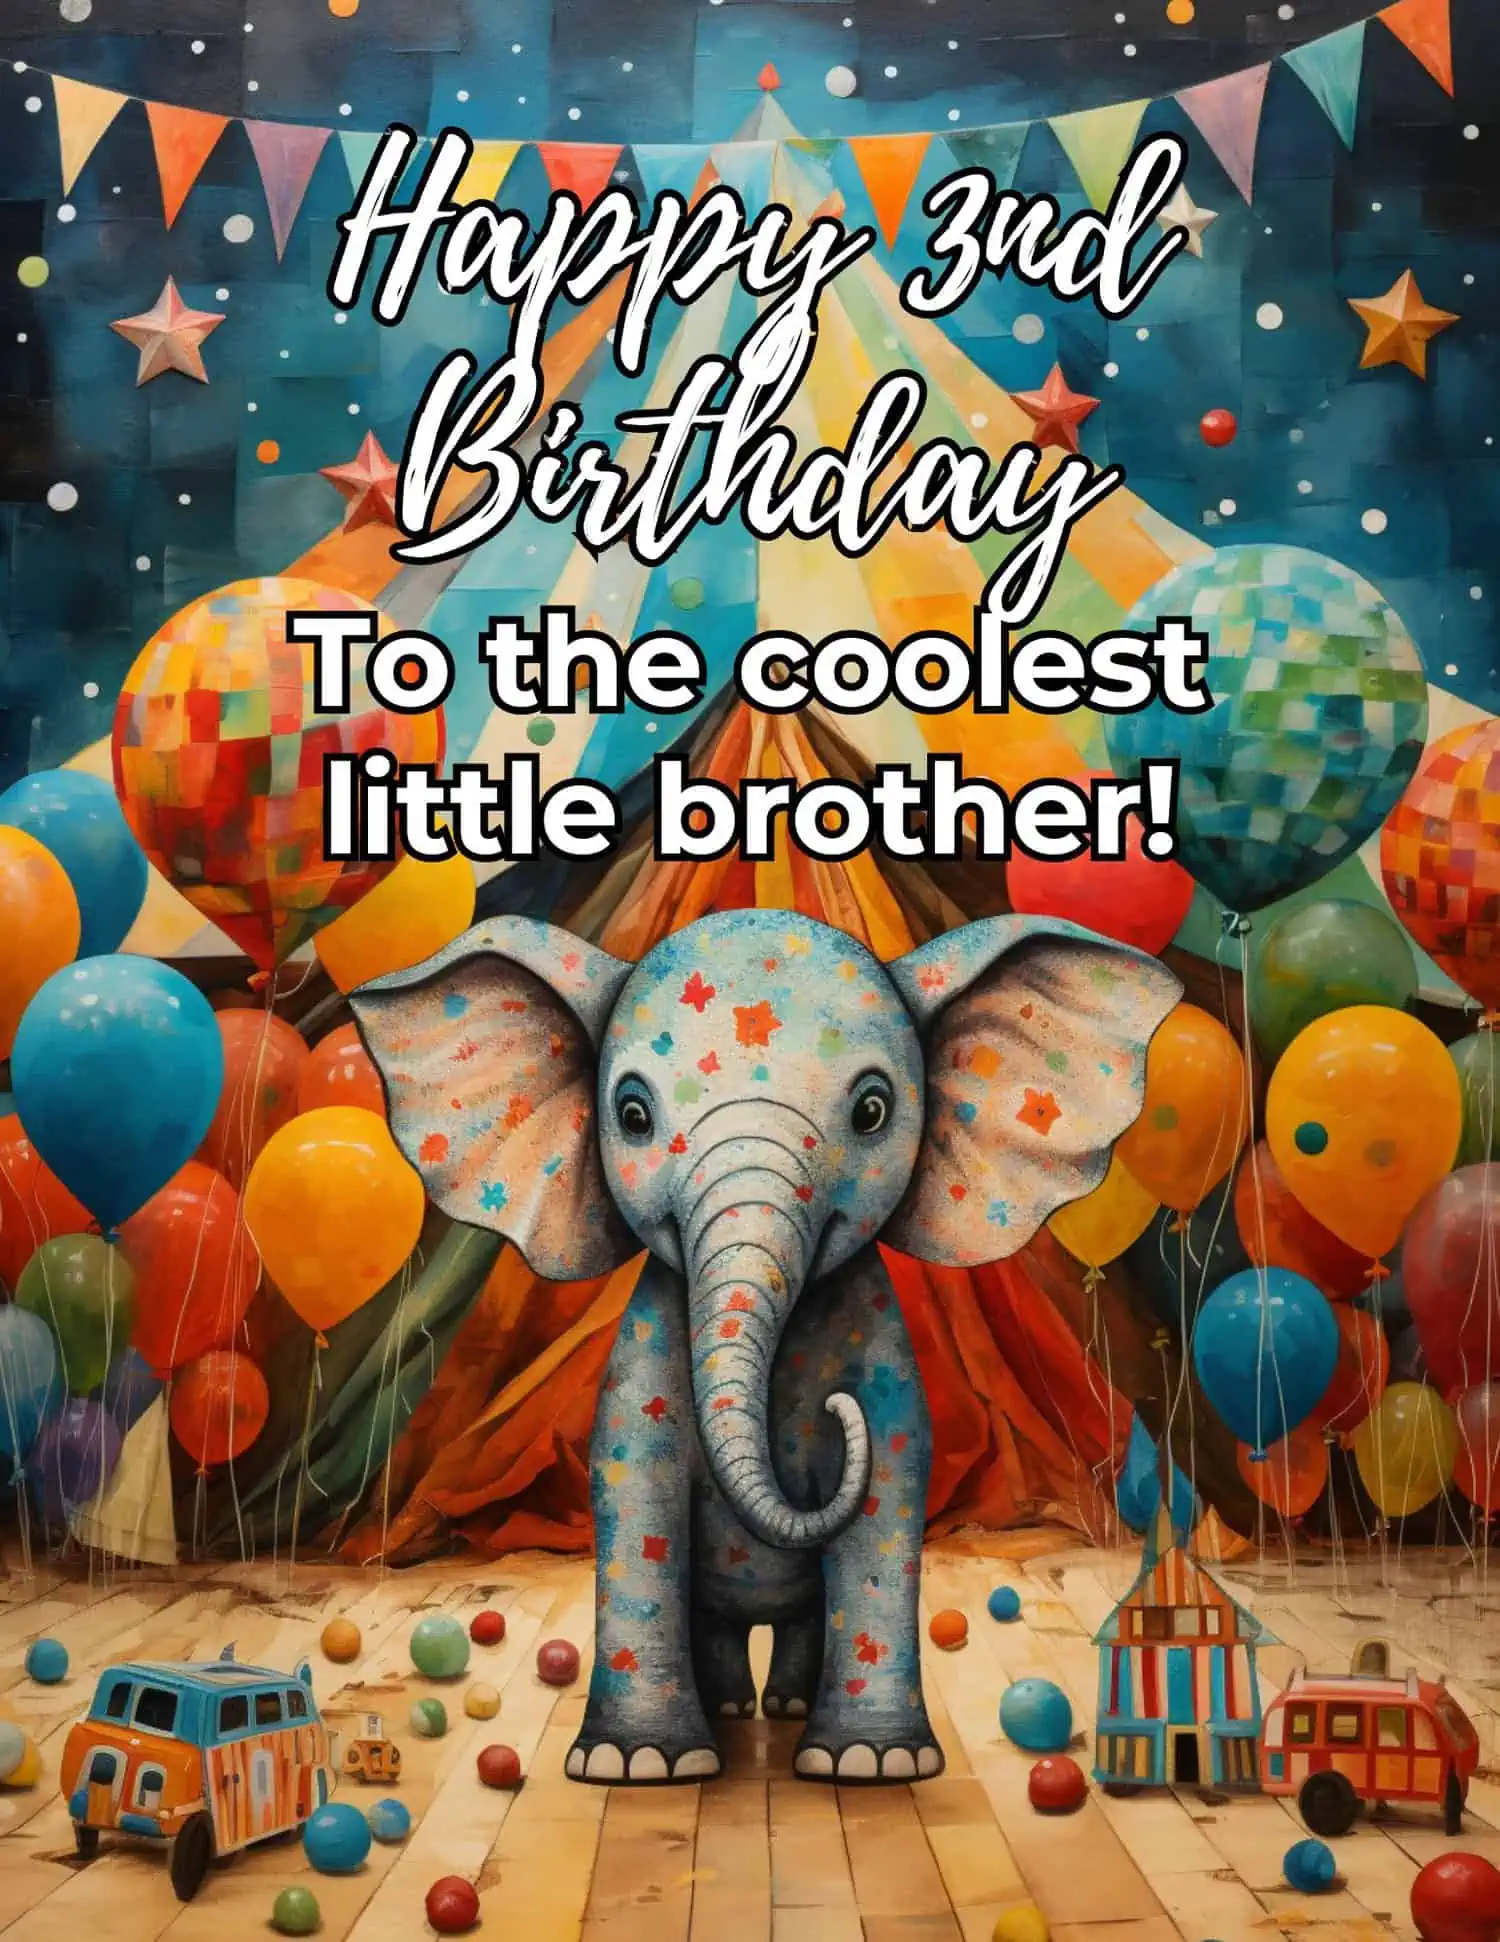 A collection of affectionate and playful birthday wishes perfectly suited for a brother on his third birthday, reflecting the joy, growth, and loving bond of sibling relationships.